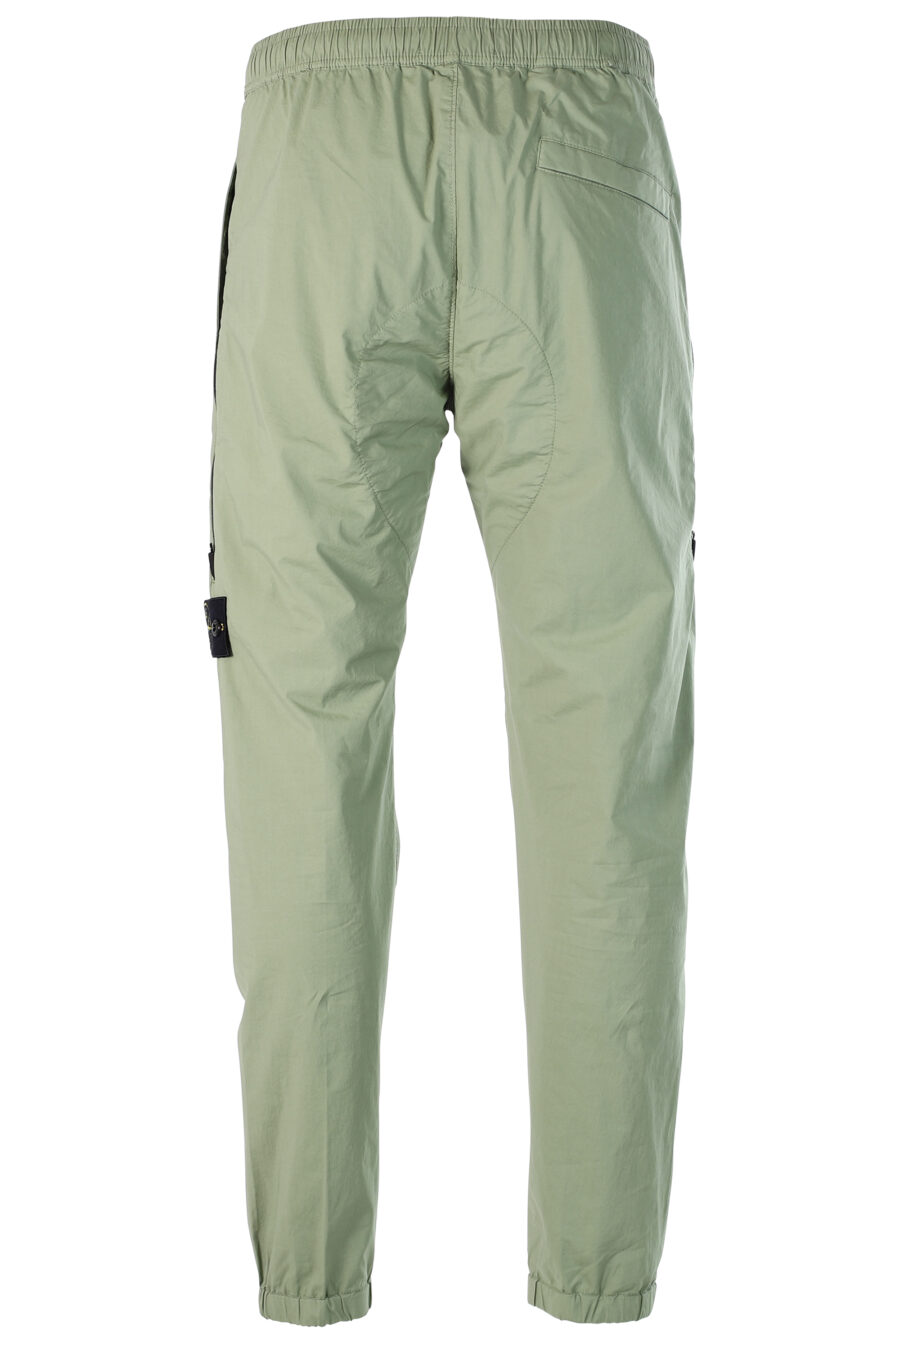 Stone Island - Military green cargo style trousers and patch - BLS